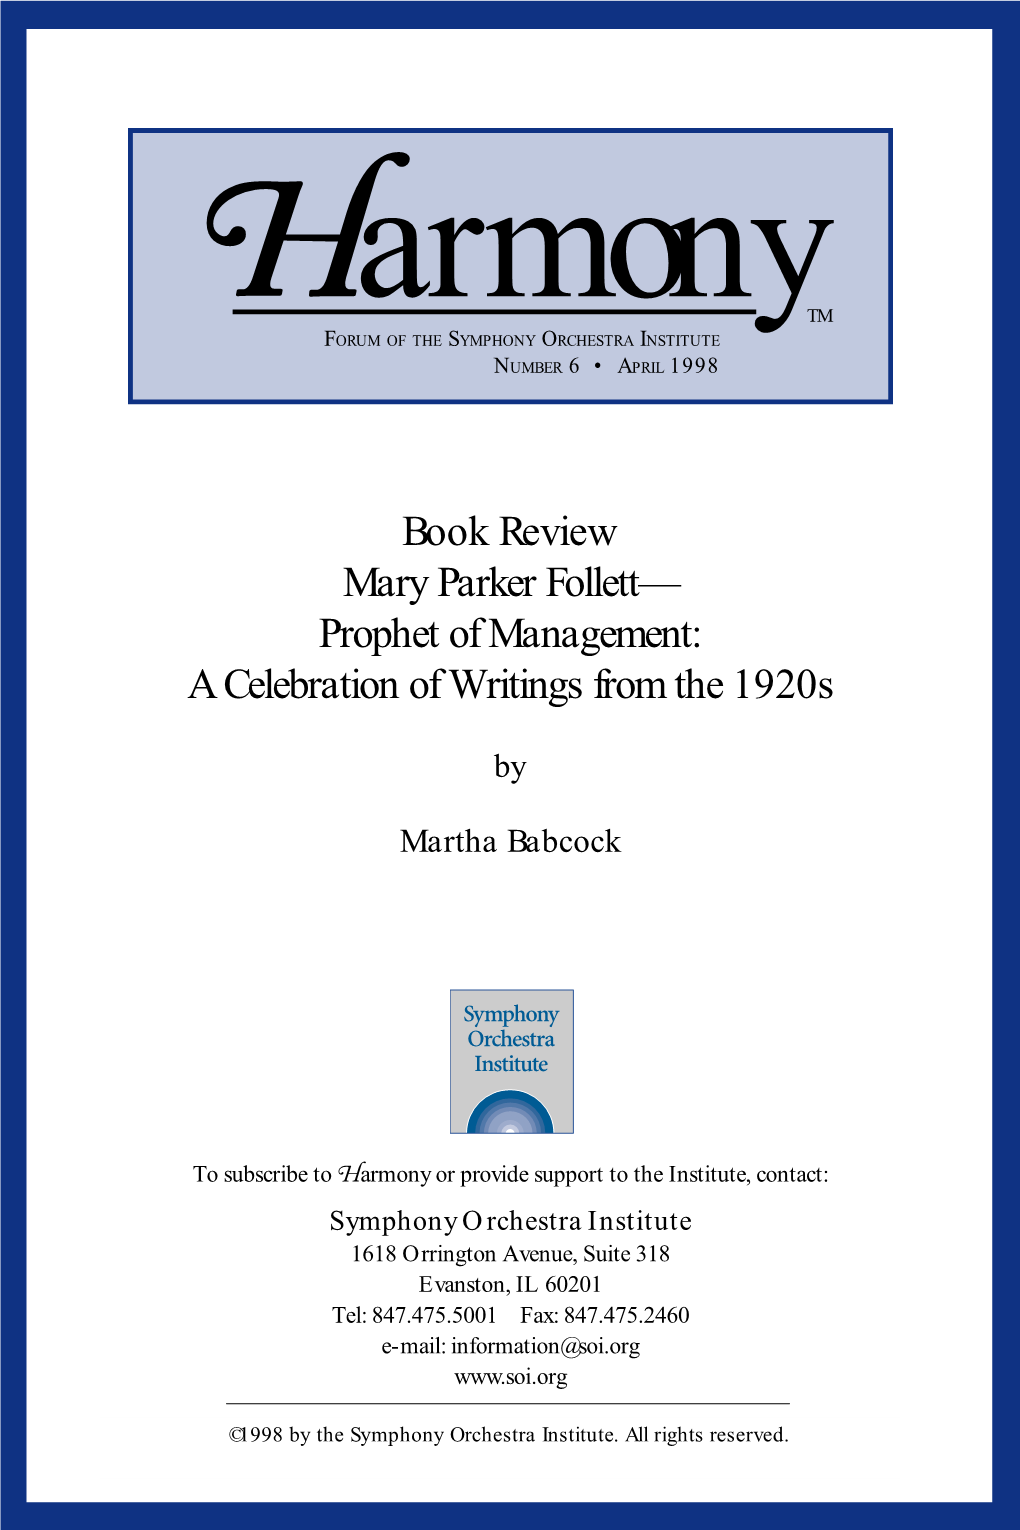 Book Review Mary Parker Follett— Prophet of Management: a Celebration of Writings from the 1920S